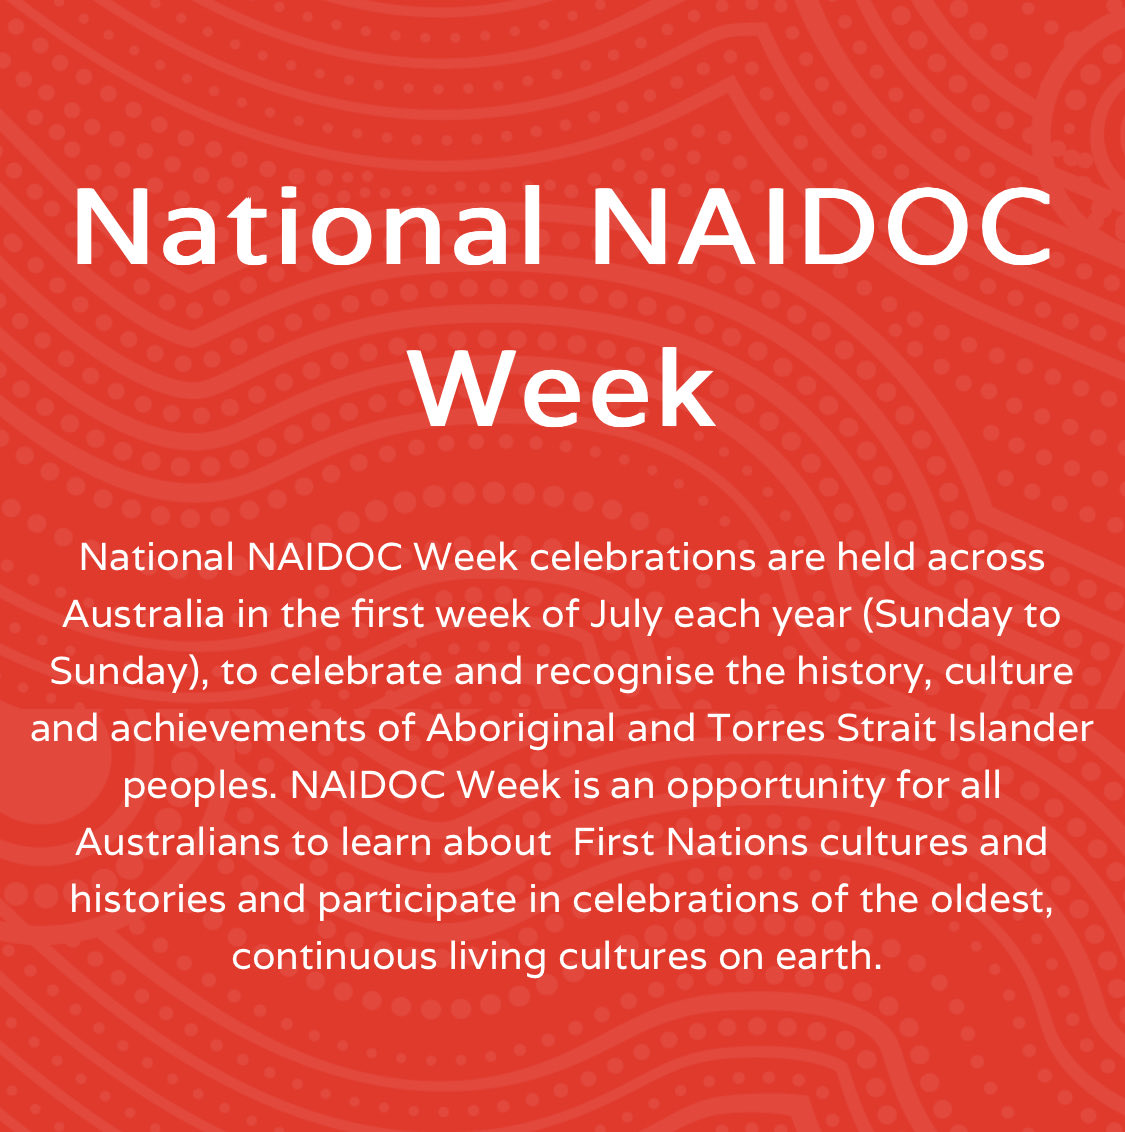 NAIDOC Week is coming up in July. 

I would love to organise a blackout day across twitter to highlight education on Aboriginal Australian people and culture. This would involve only posting about and retweeting content on this topic for that day. 

Would you be involved?